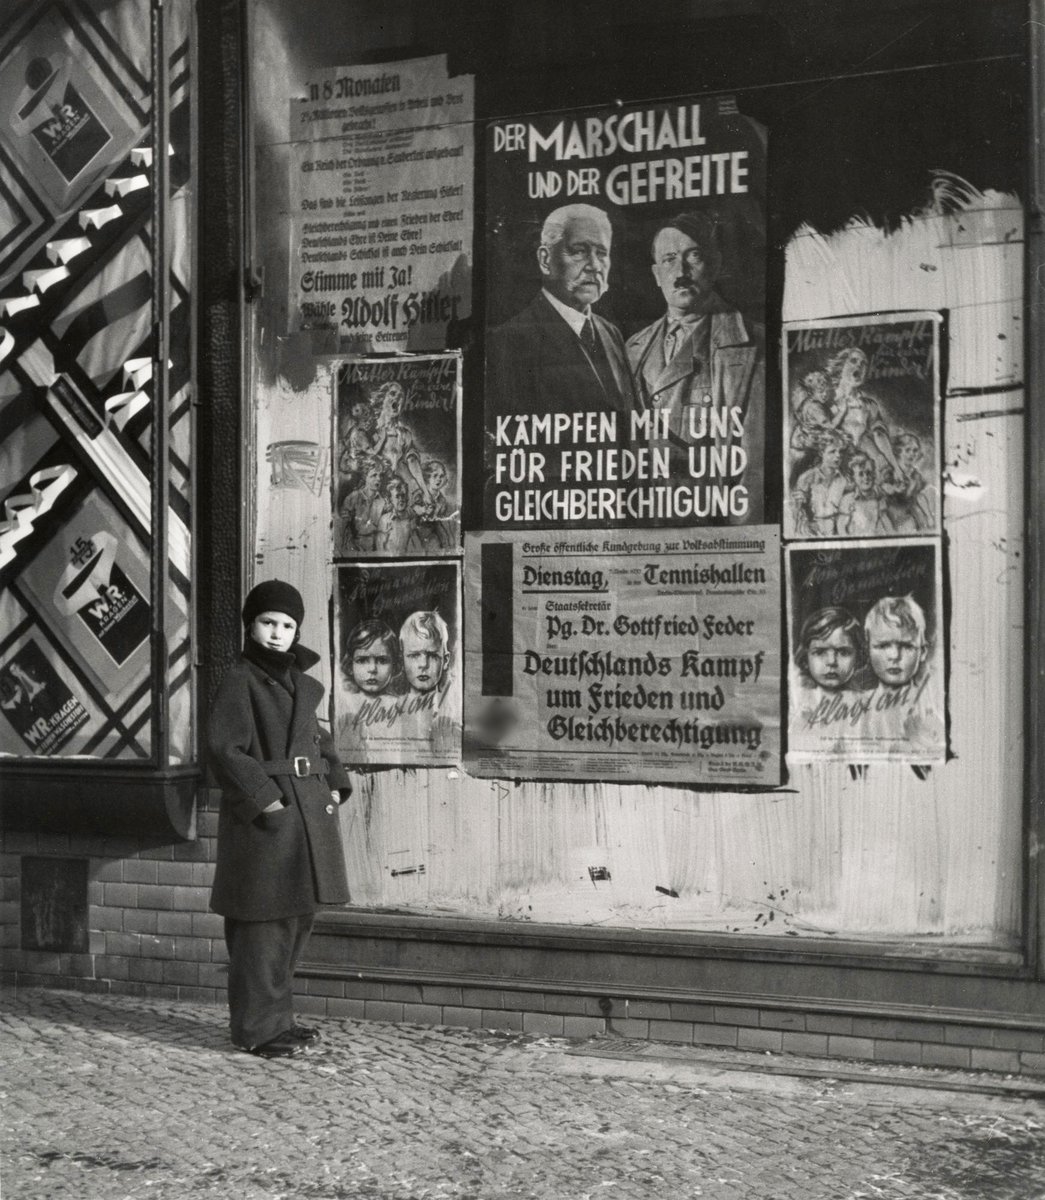 Photo taken by the photographer Roman Vishniac in Berlin, 1933, with Vishniac’s daughter posing next to election posters. The one with Hitler and Hindenburg reads: “The Marshal and the Corporal fight with us for peace and equality”.